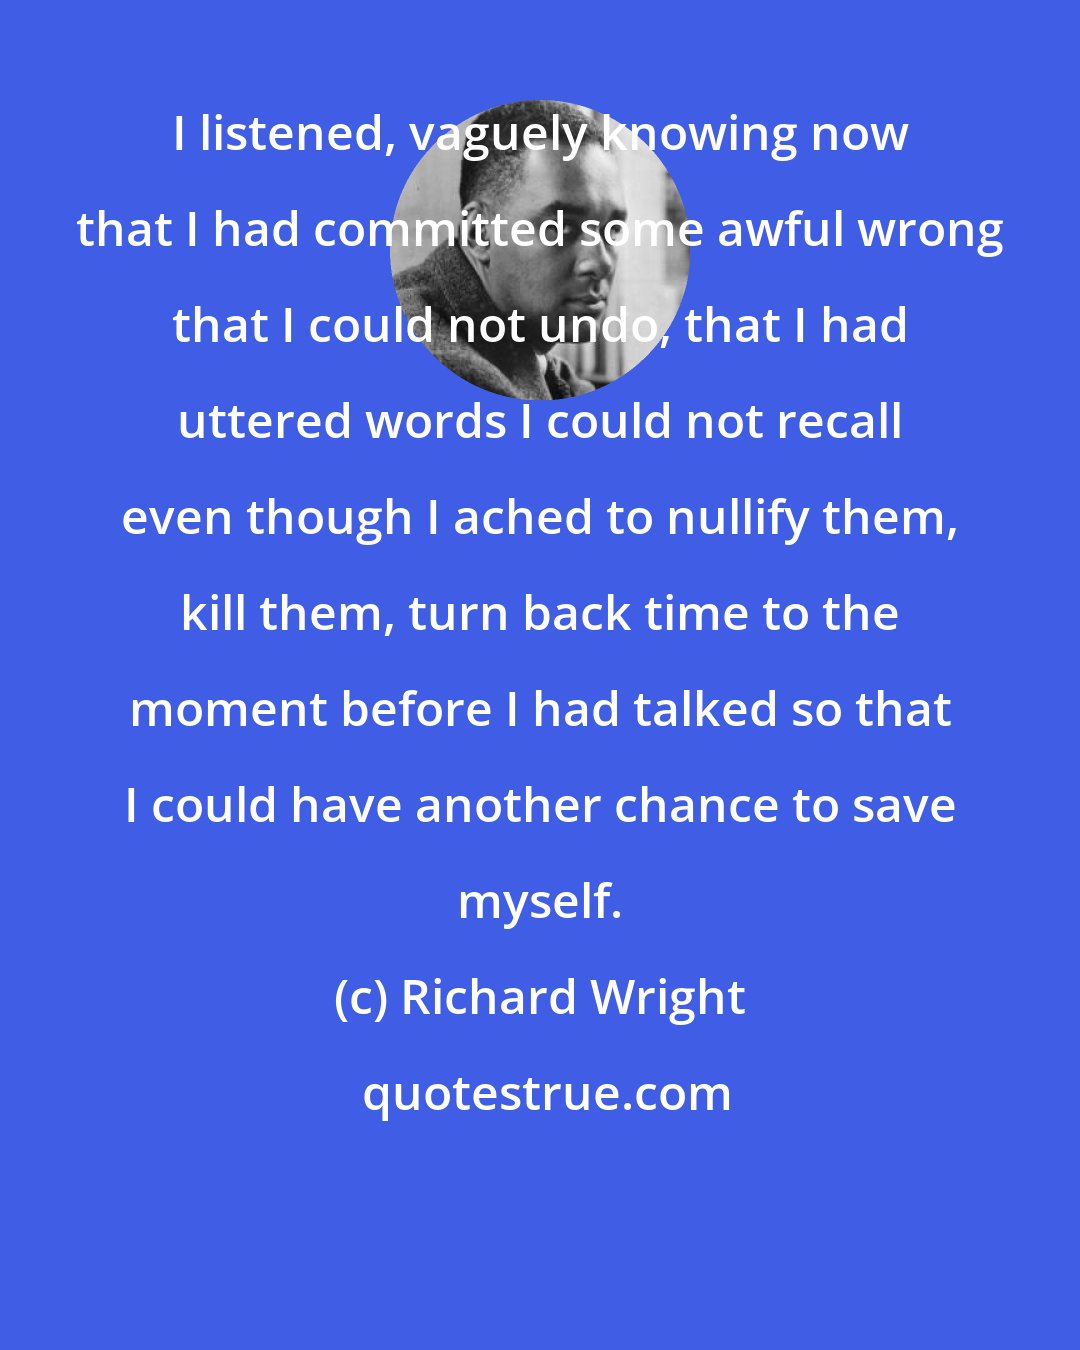 Richard Wright: I listened, vaguely knowing now that I had committed some awful wrong that I could not undo, that I had uttered words I could not recall even though I ached to nullify them, kill them, turn back time to the moment before I had talked so that I could have another chance to save myself.